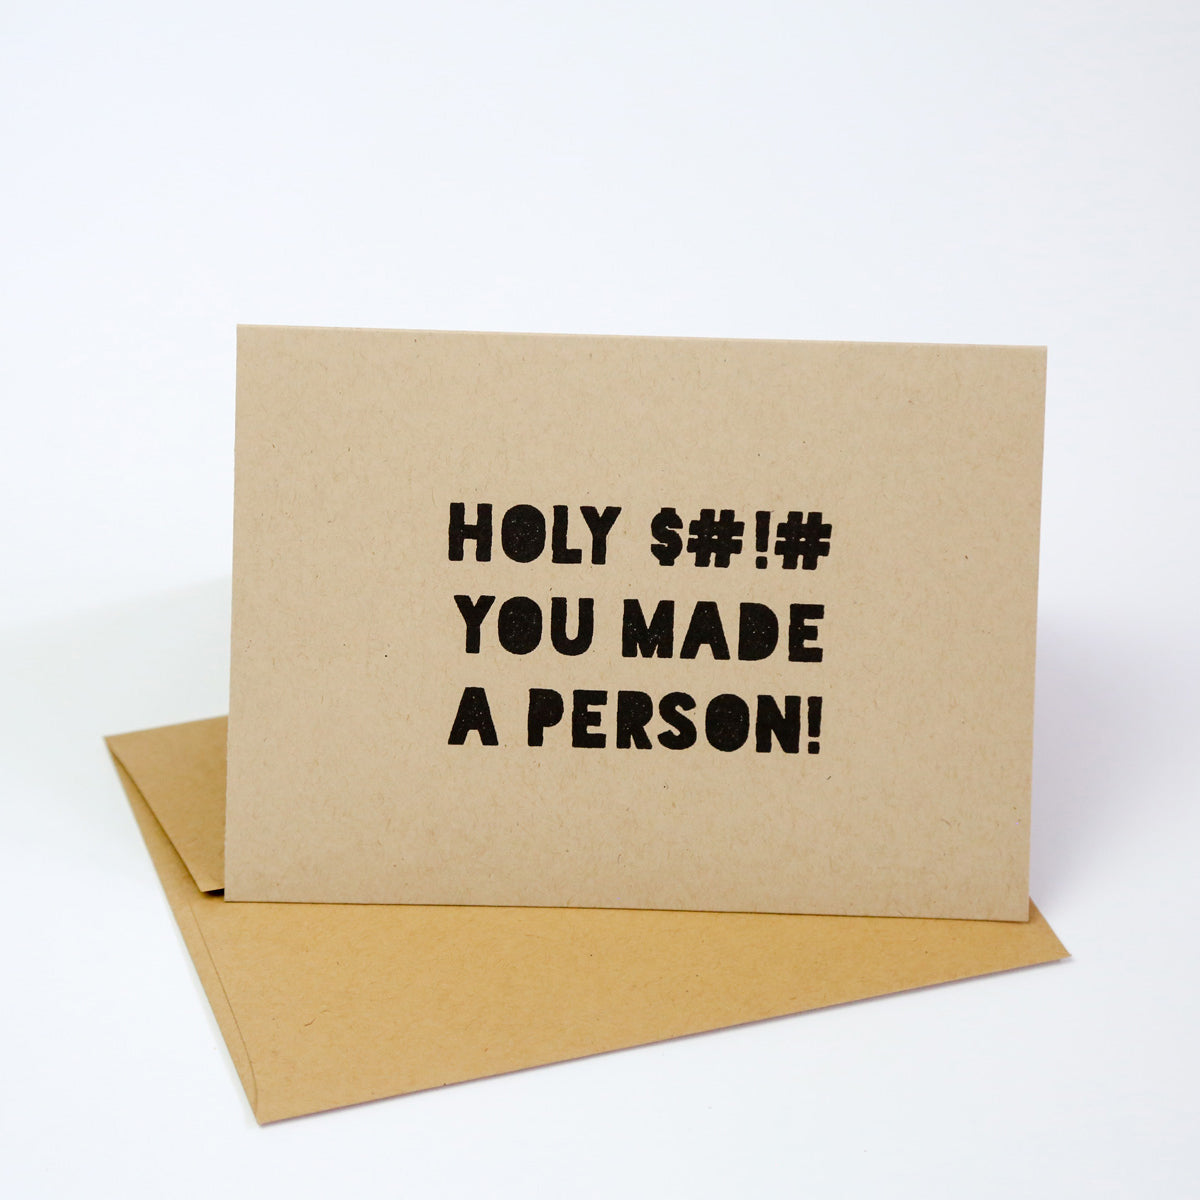 Holy $#!# you made a person - Greeting Card